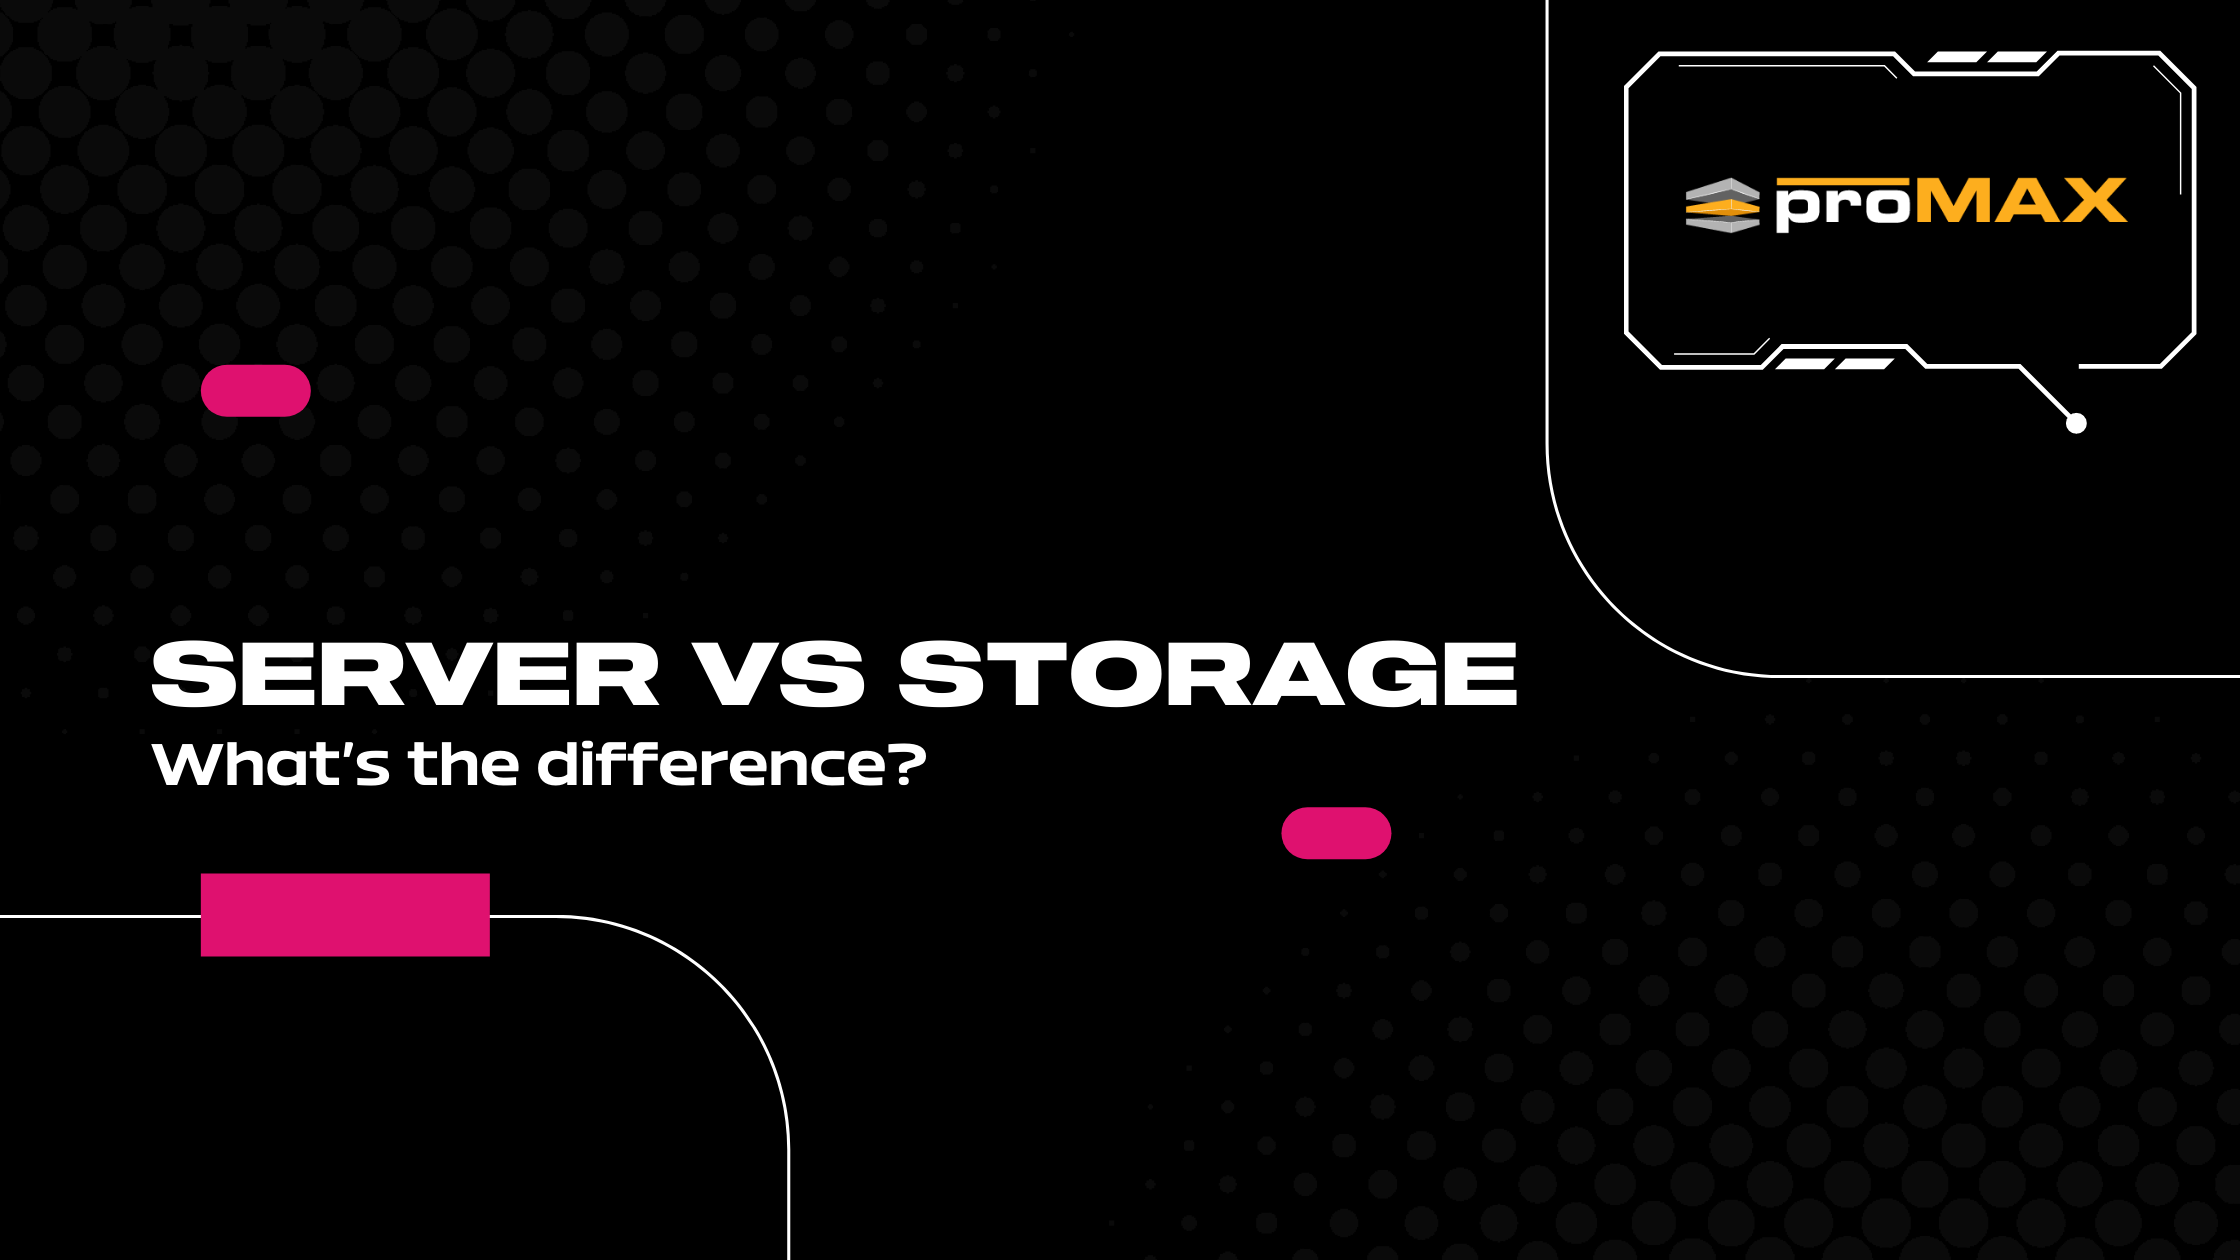 Server vs Storage: What’s the Difference?